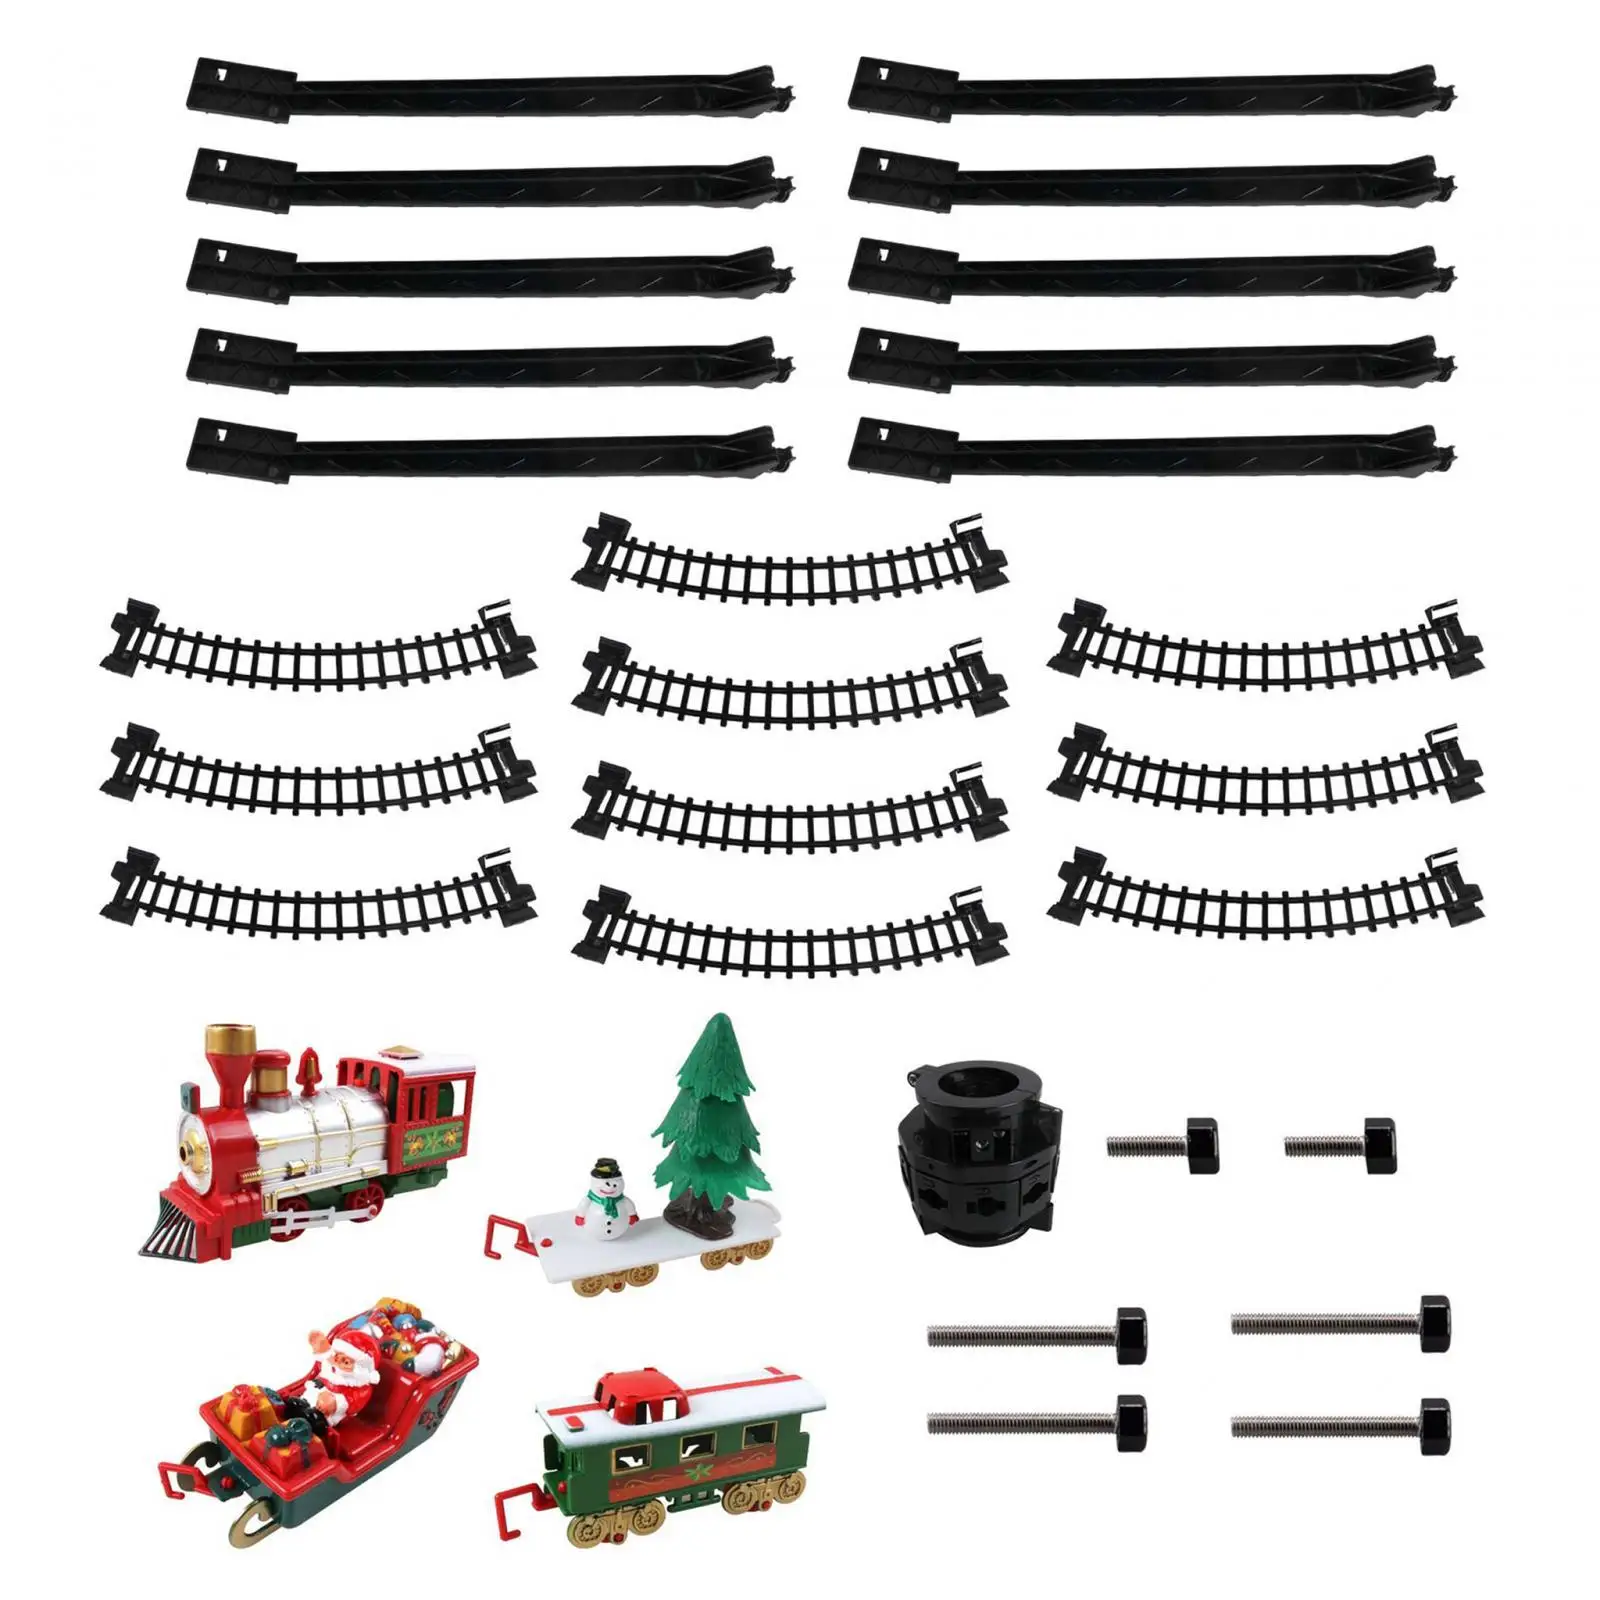 Christmas Train Set DIY Decor Small Trains Track Cargo Cars and 10 Tracks Gifts Toy Train Set for Children Girls Boys Kids